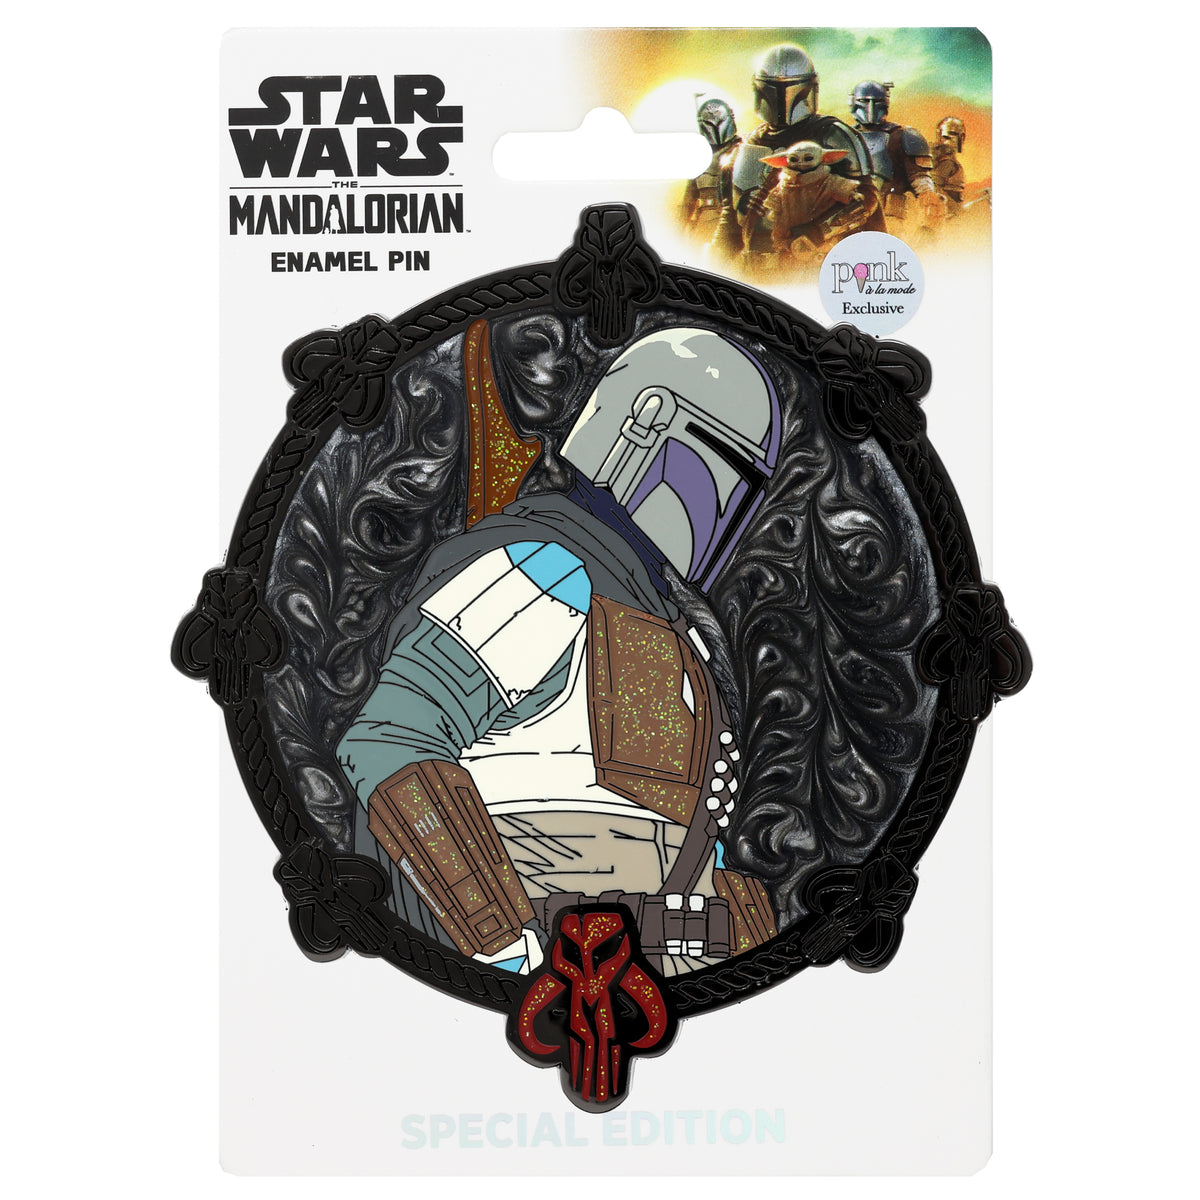 Star Wars Iconic Series - The Mandalorian Special Edition 300 - NEW RELEASE